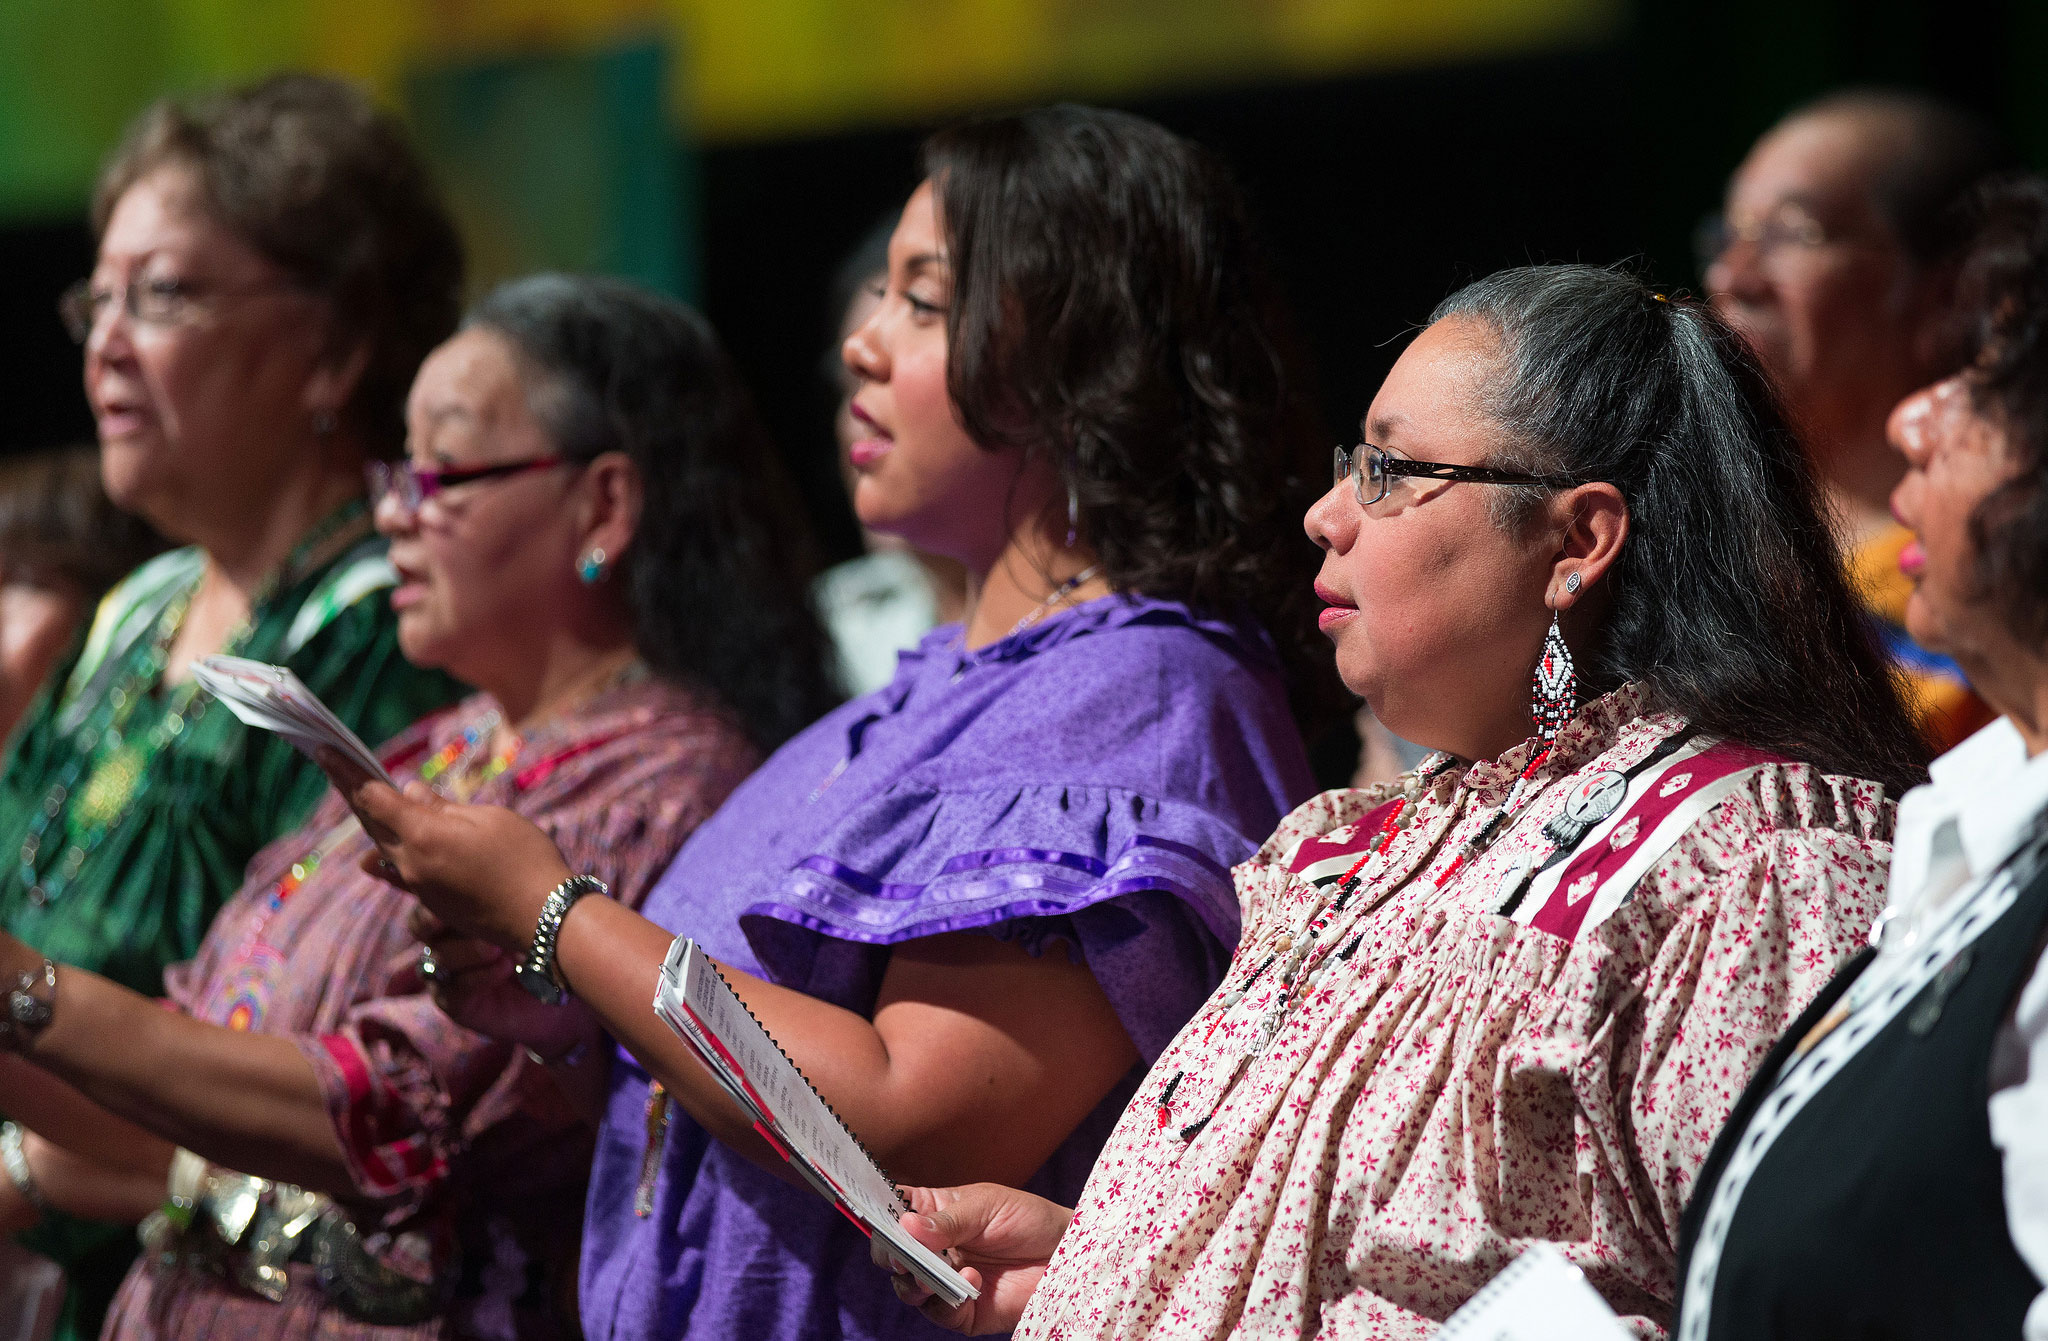 The Cherokee Choir from the Oklahoma Indian Missionary Conference sings during morning worship at the 2016 United Methodist General Conference in Portland, Ore. Photo by Mike DuBose, UMNS